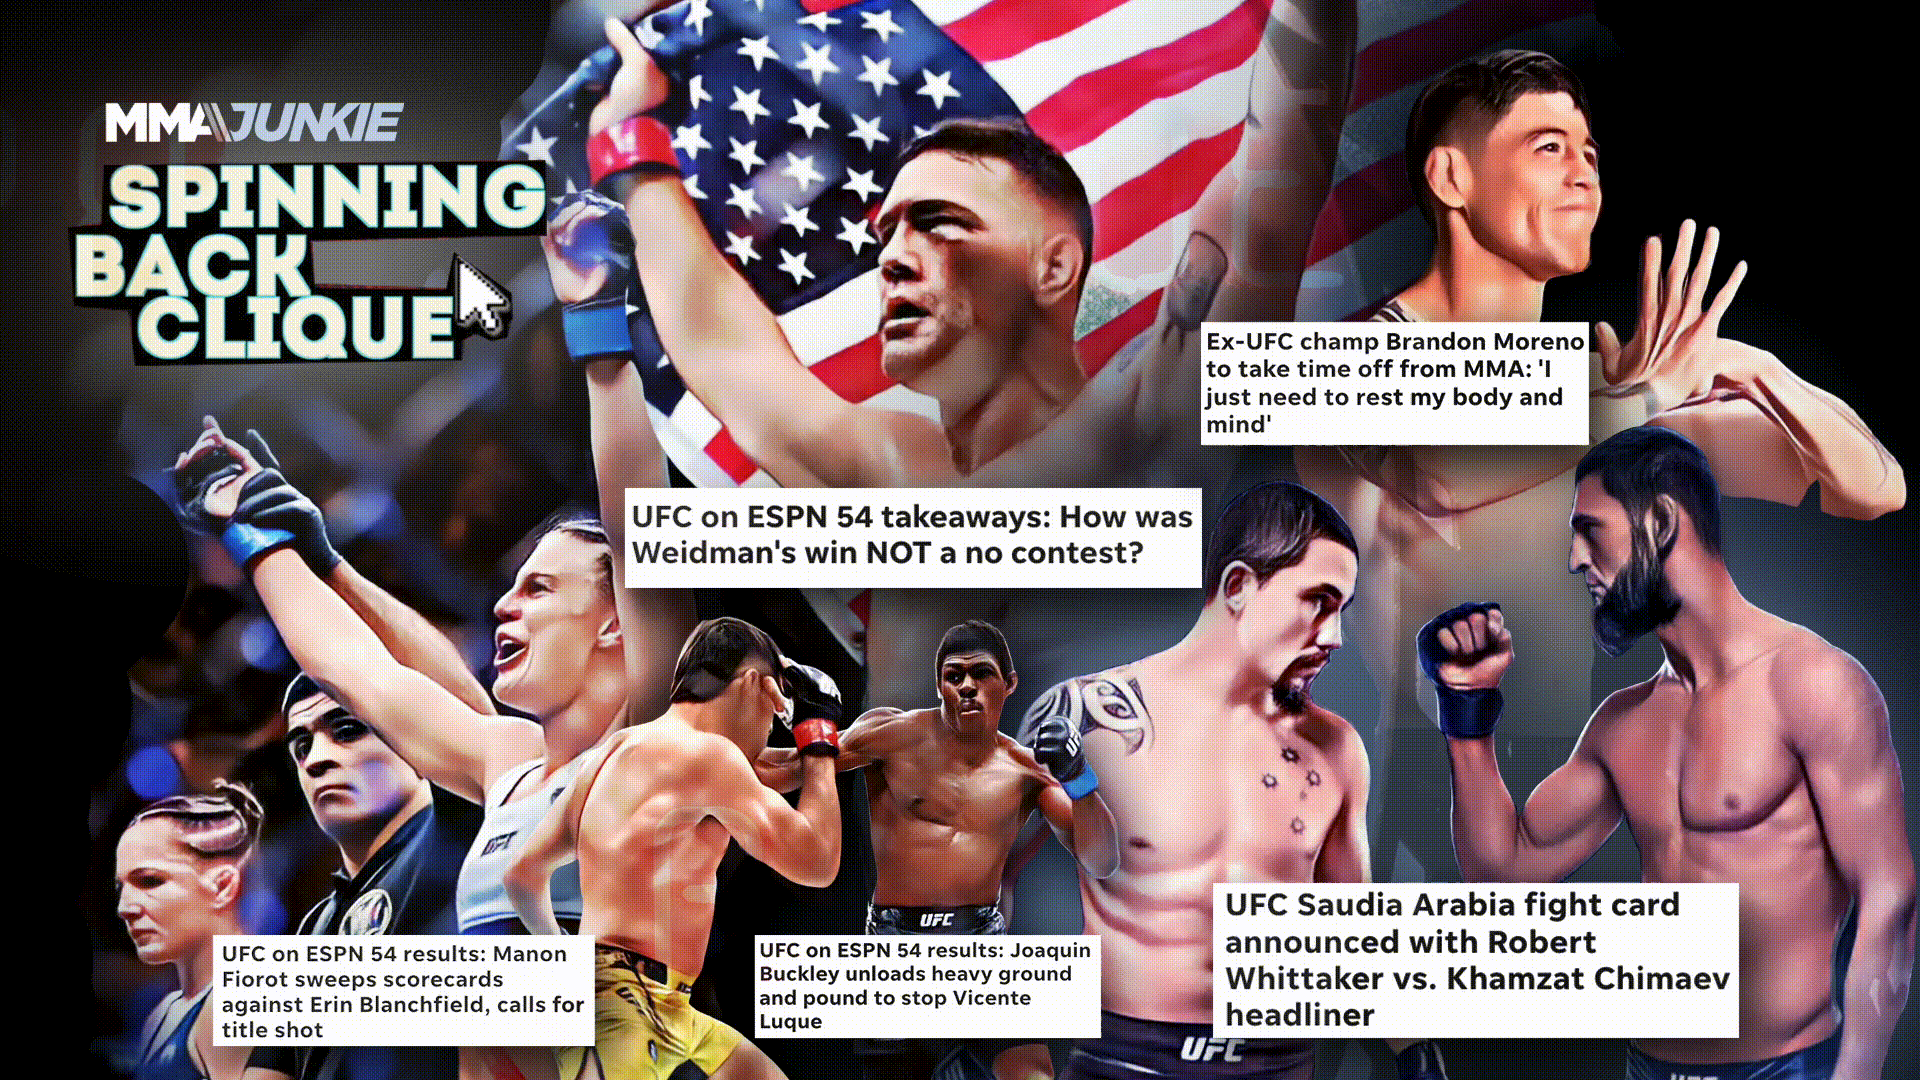 Spinning Back Clique REPLAY: UFC on ESPN 54, Brandon Moreno’s hiatus from MMA, Whittaker-Chimaev, more